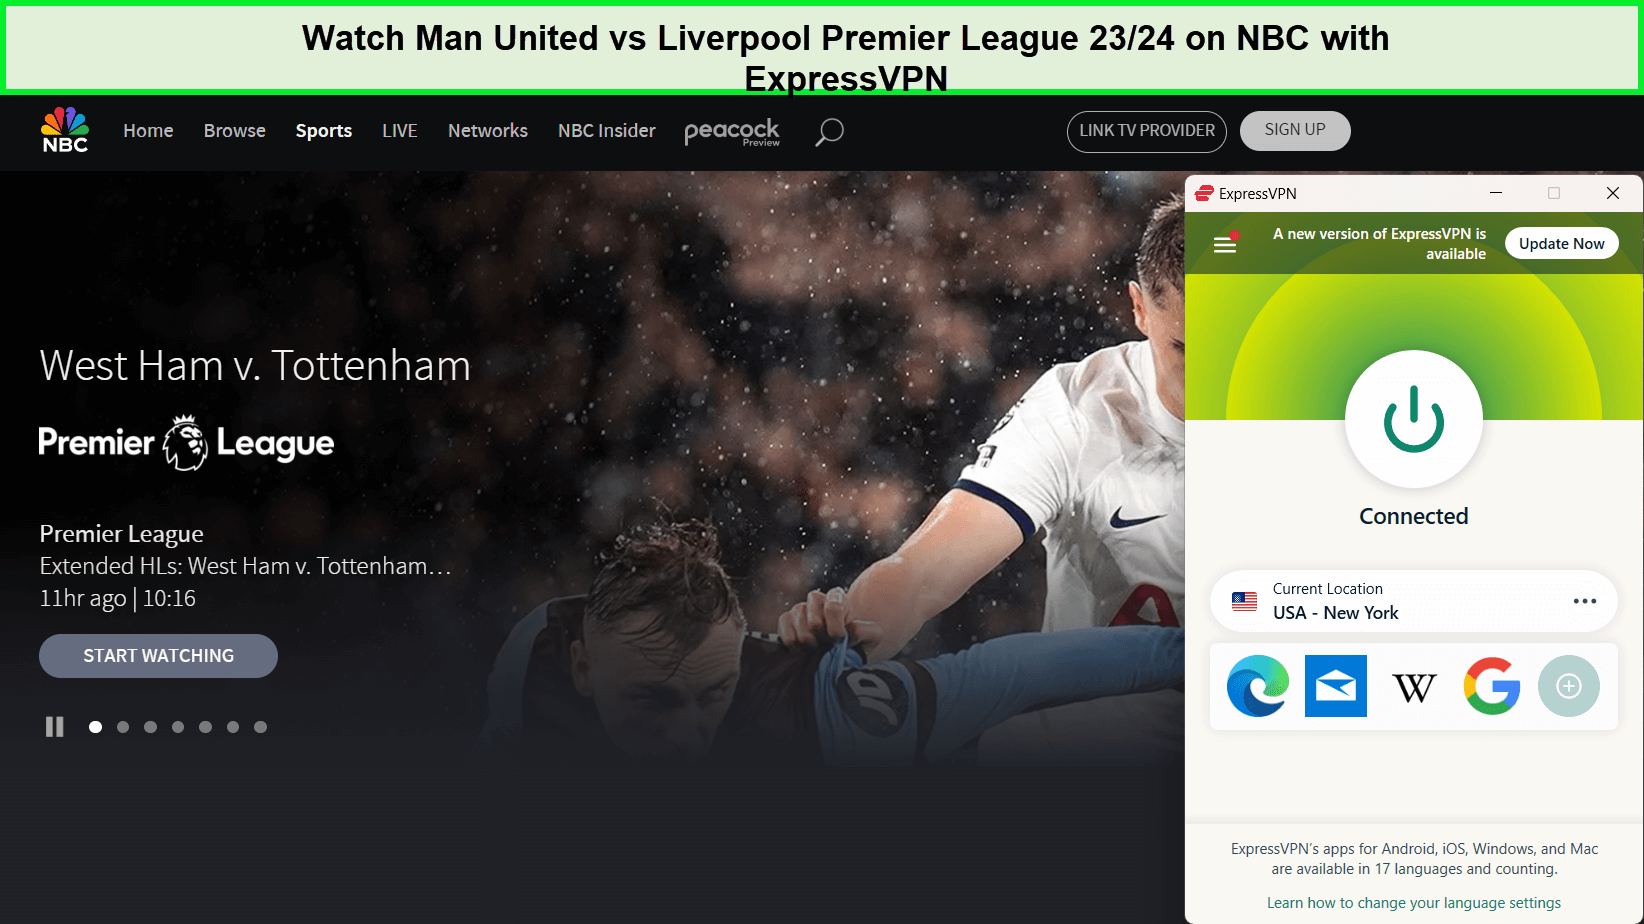 Watch-Man-United-vs-Liverpool-Premier-League-23-24-in-Netherlands-on-NBC